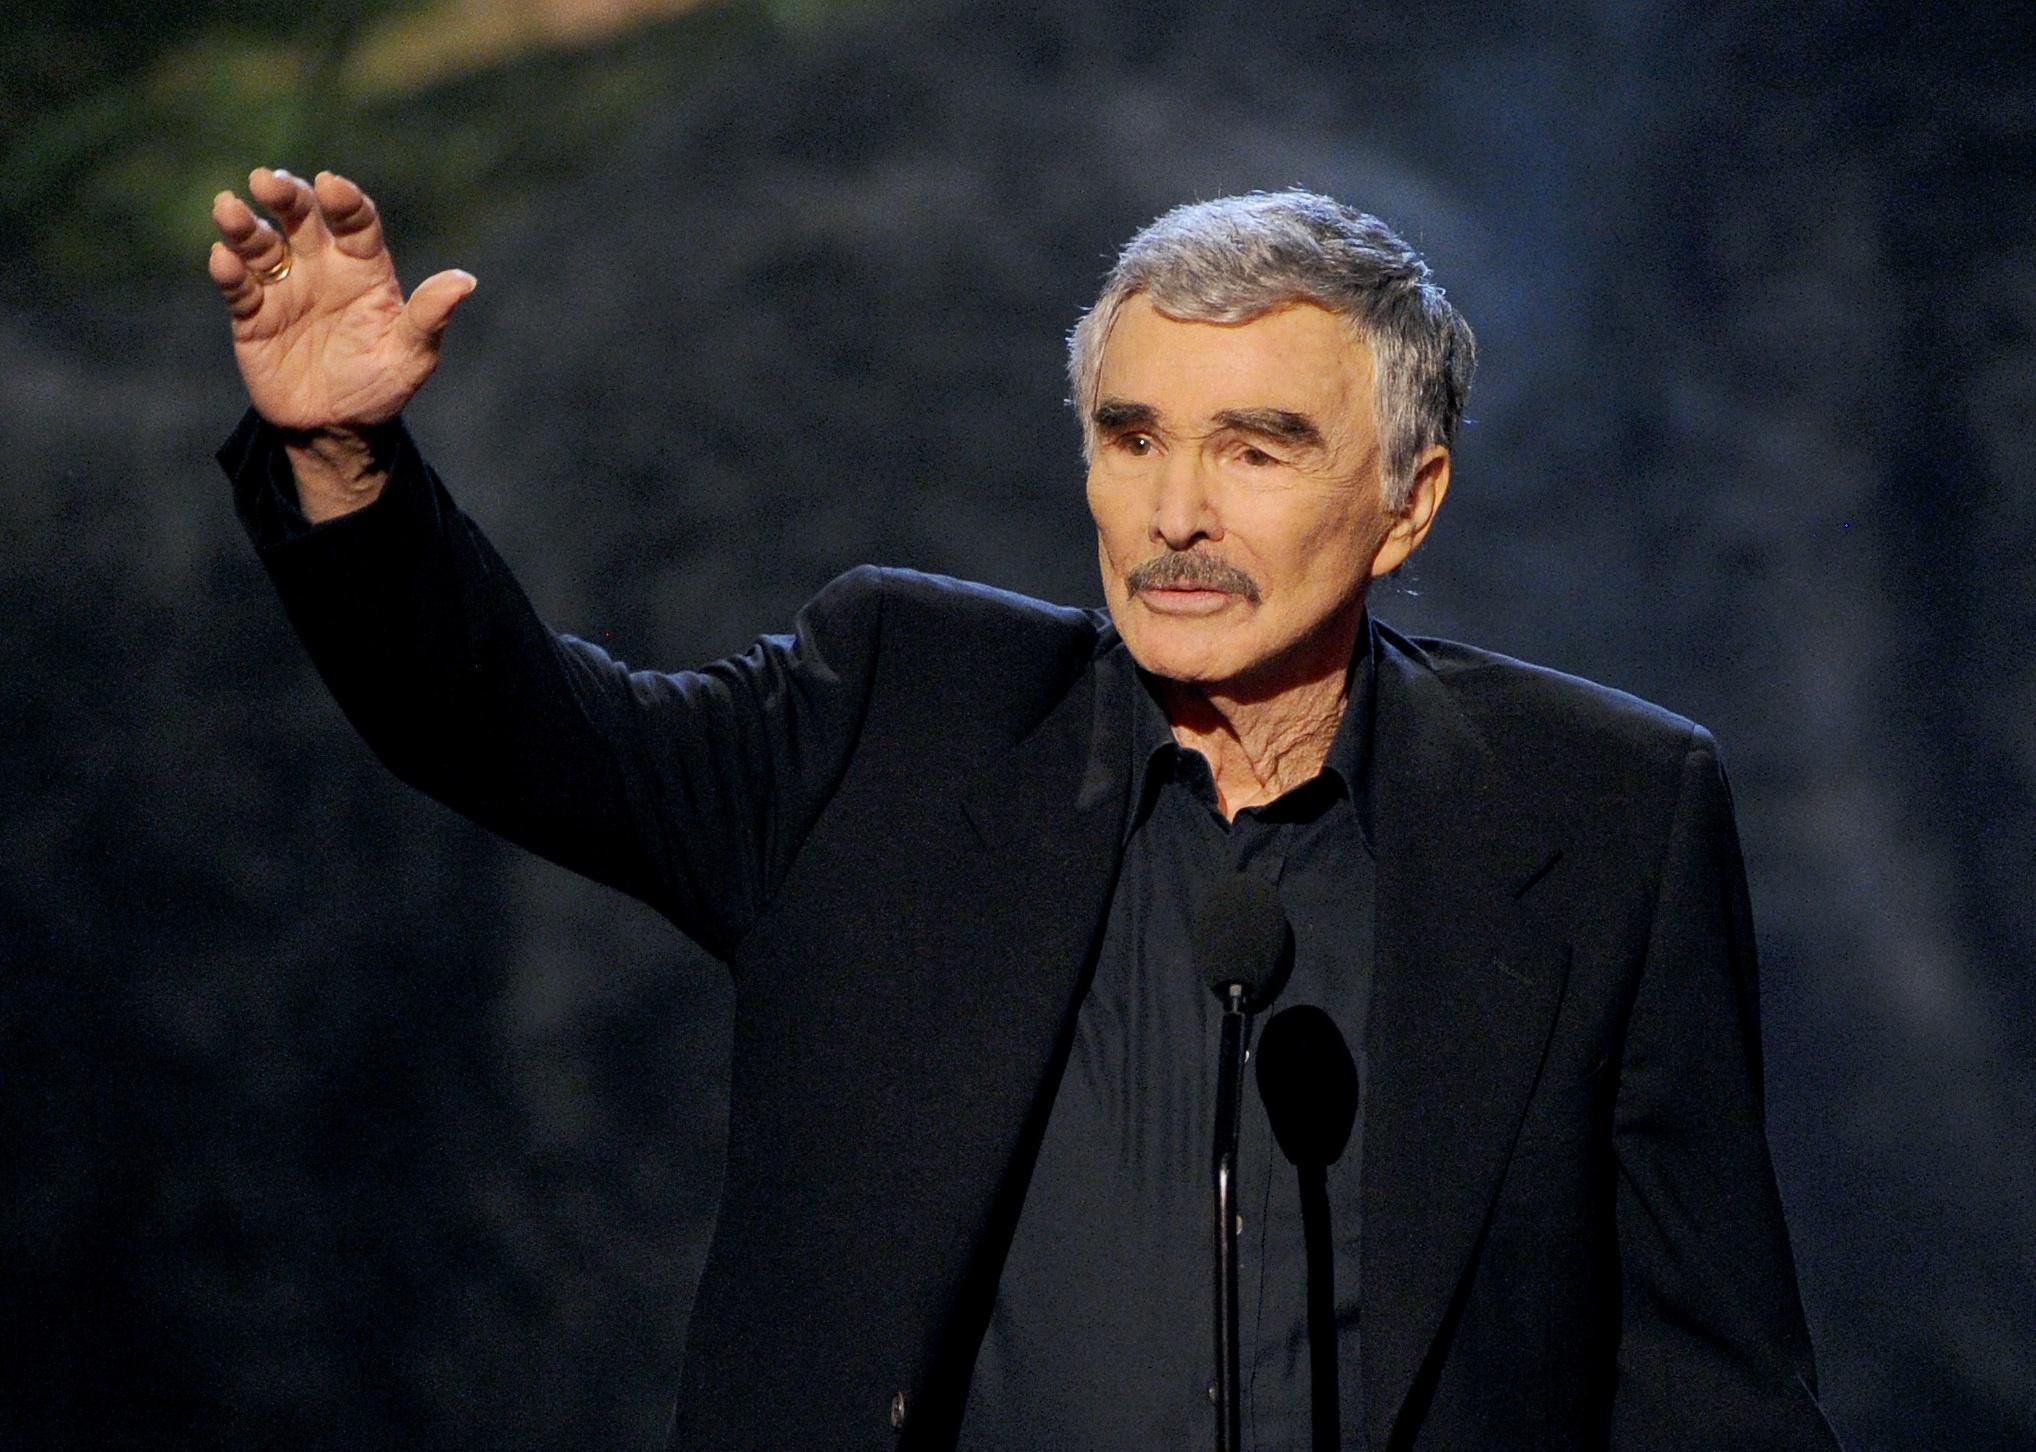 Burt Reynolds accepts award onstage during Spike TV's Guys Choice 2013.